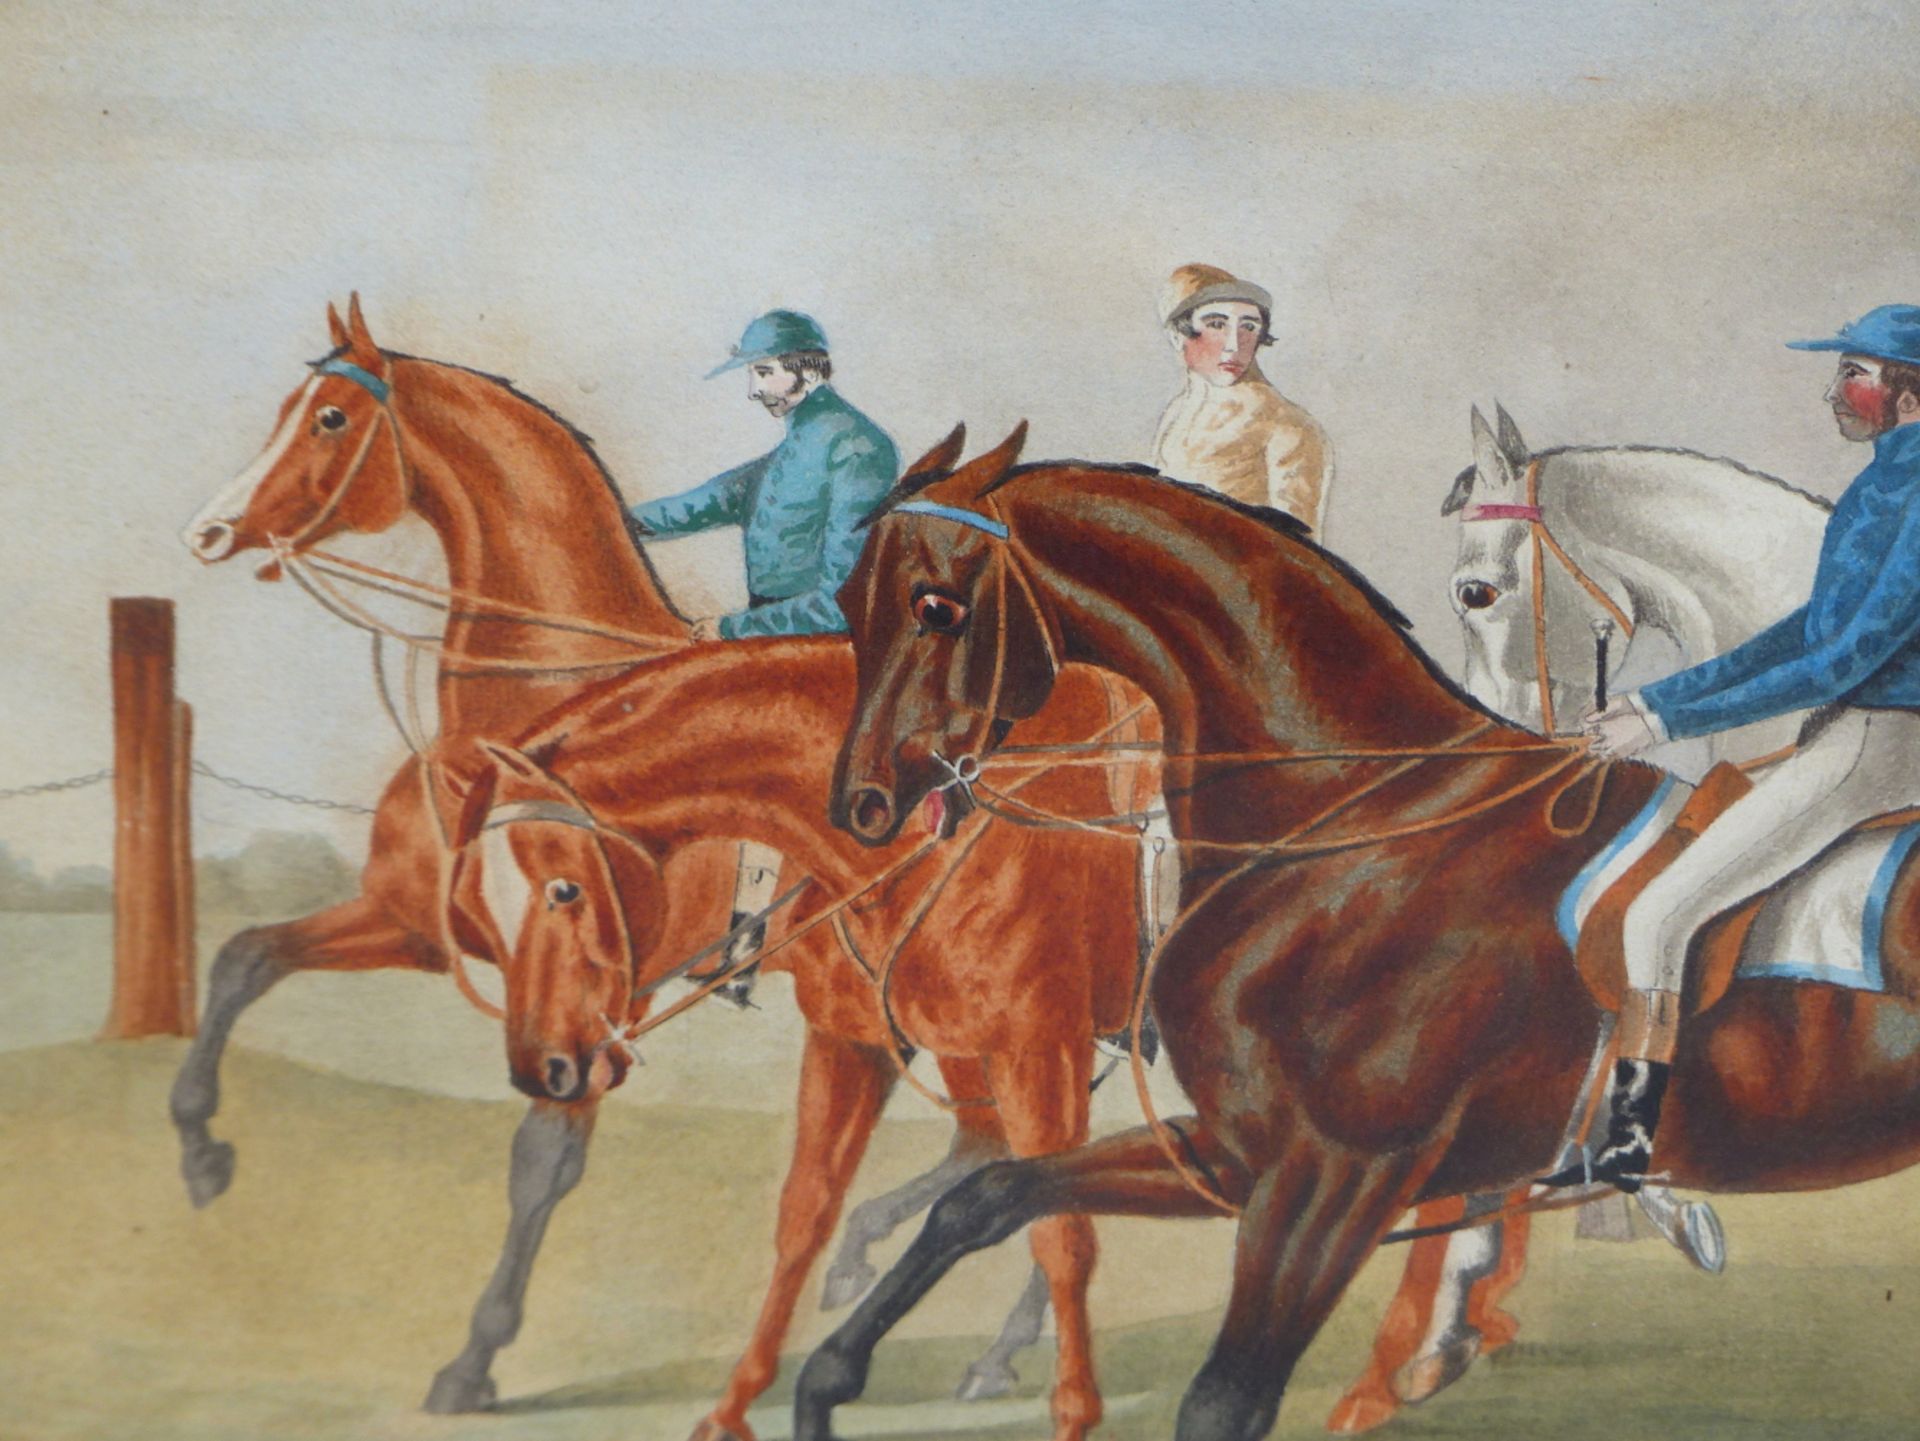 19th C. ENGLISH SCHOOL DANIEL O'ROUKE WINNING HE DERBY 1852, REPUTEDLY BY JAMES G. NOBLE, - Image 19 of 26